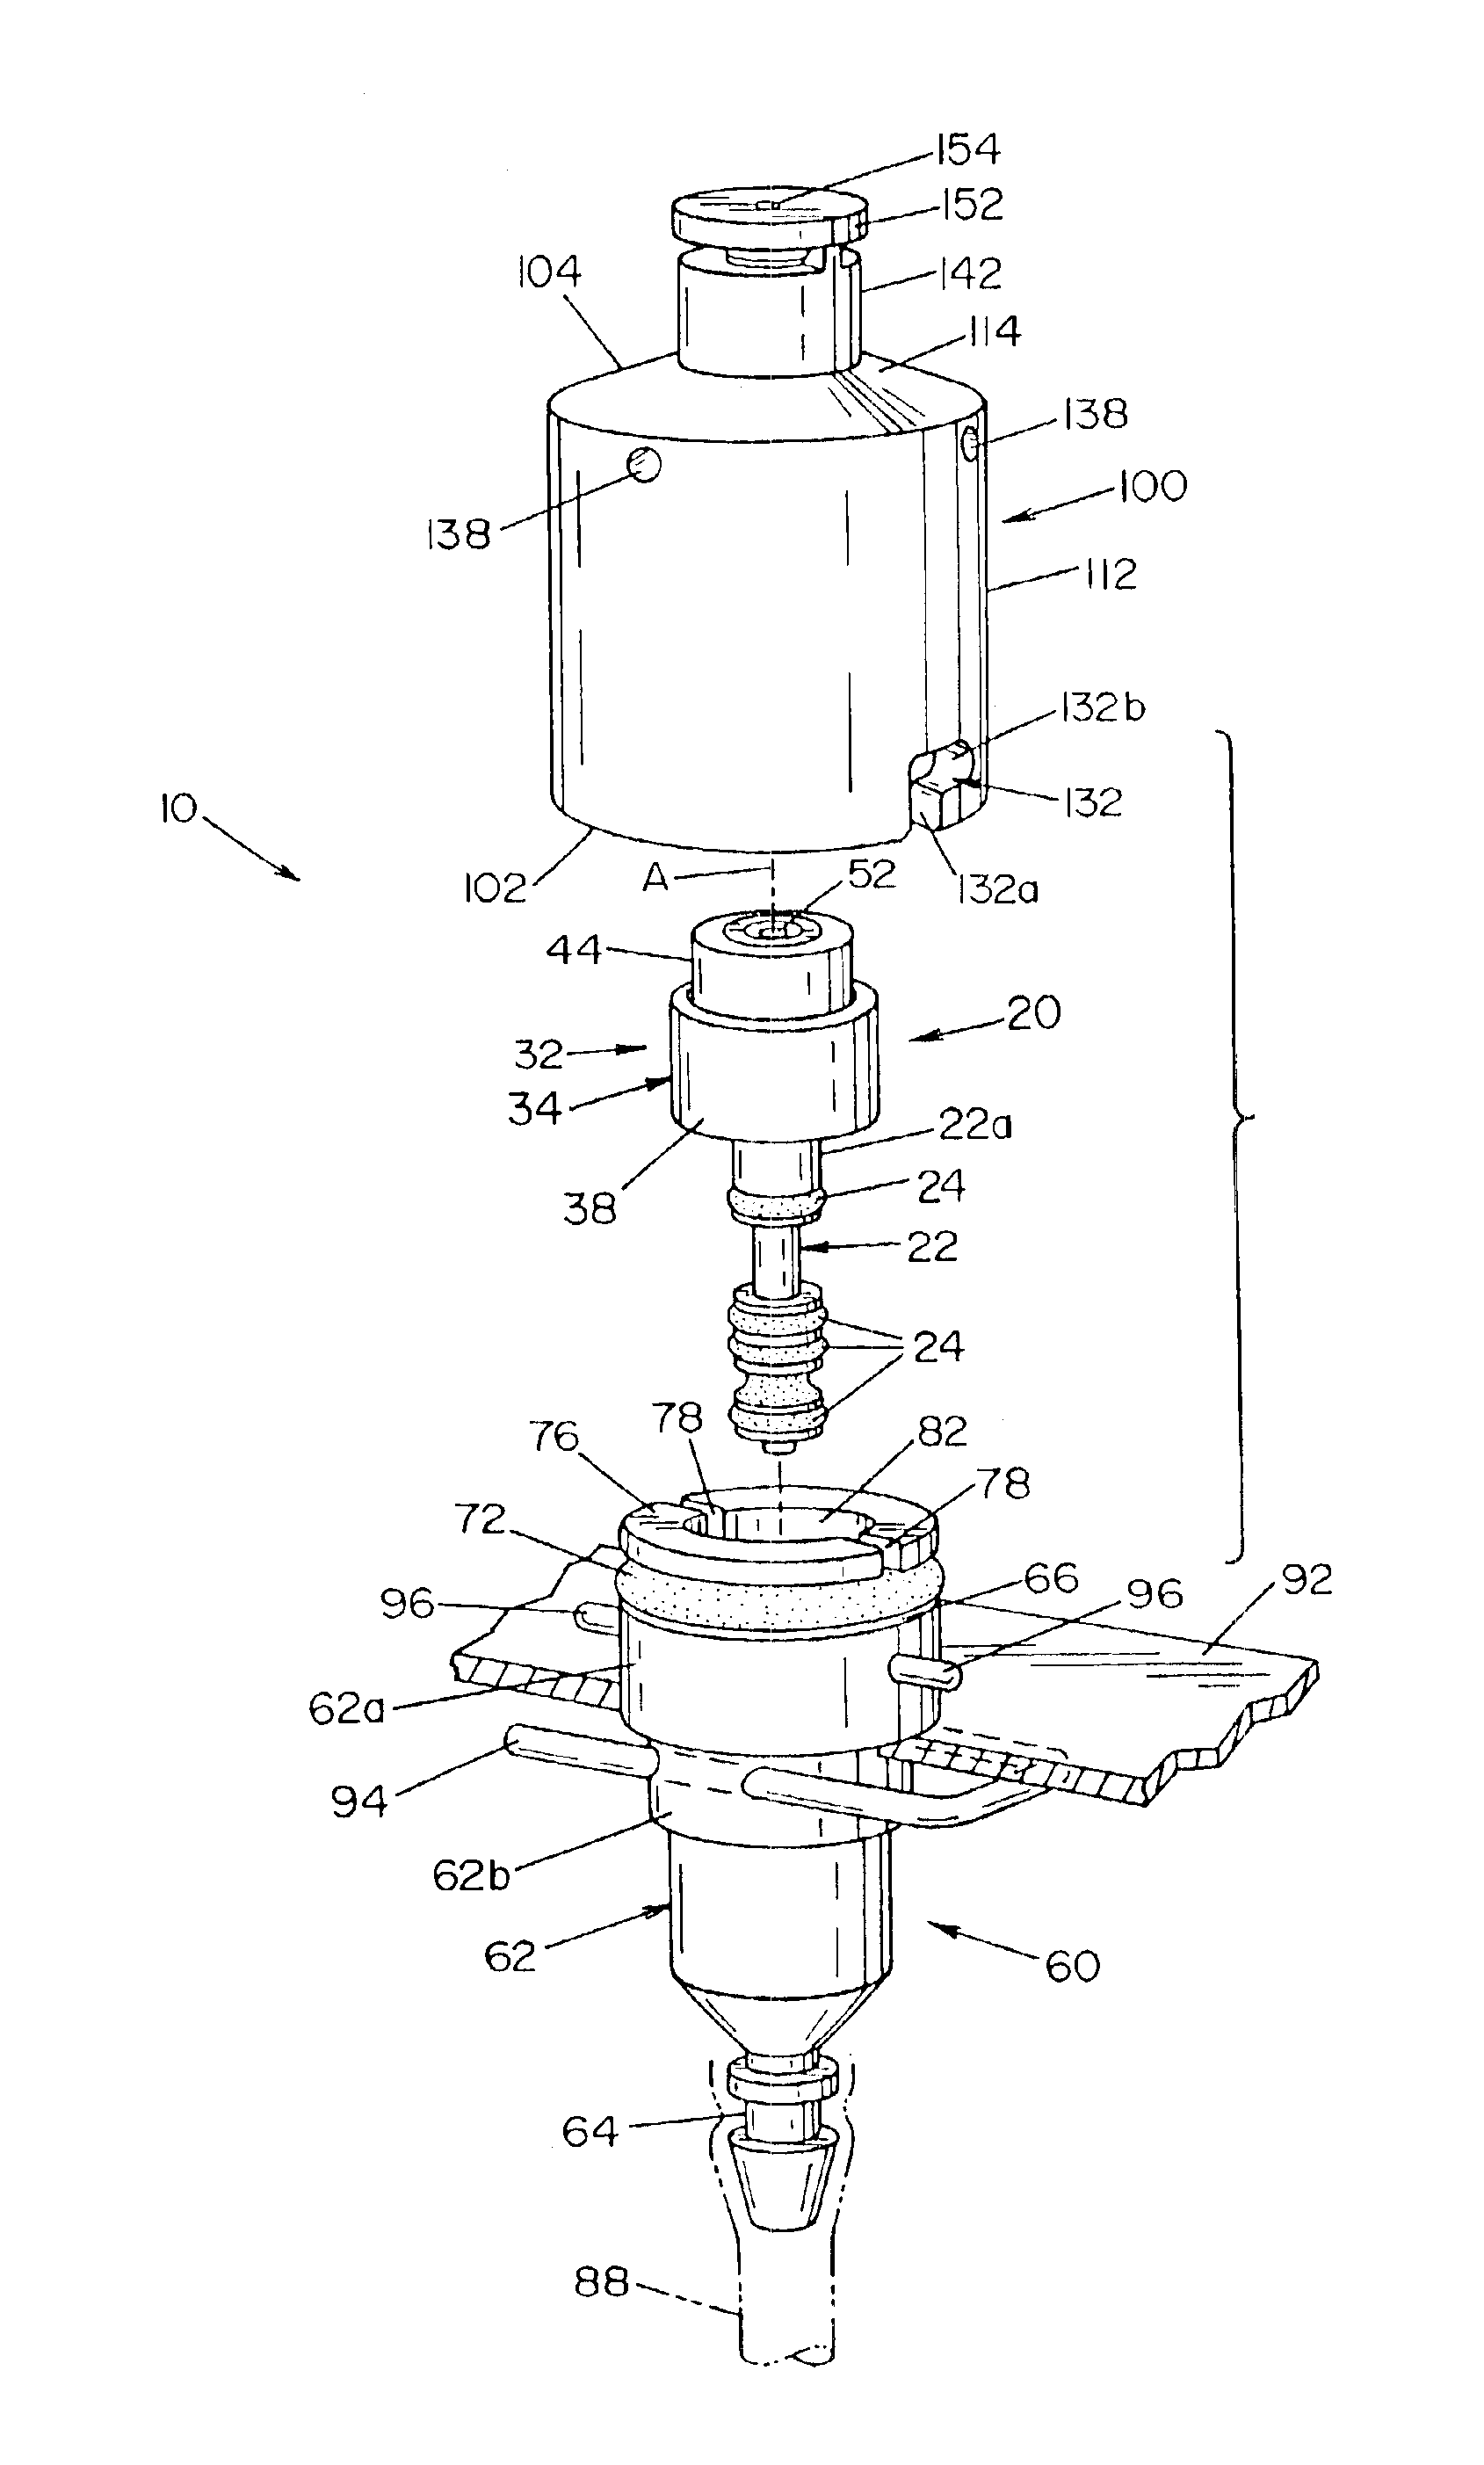 Valve holding fixture for automated reprocessor